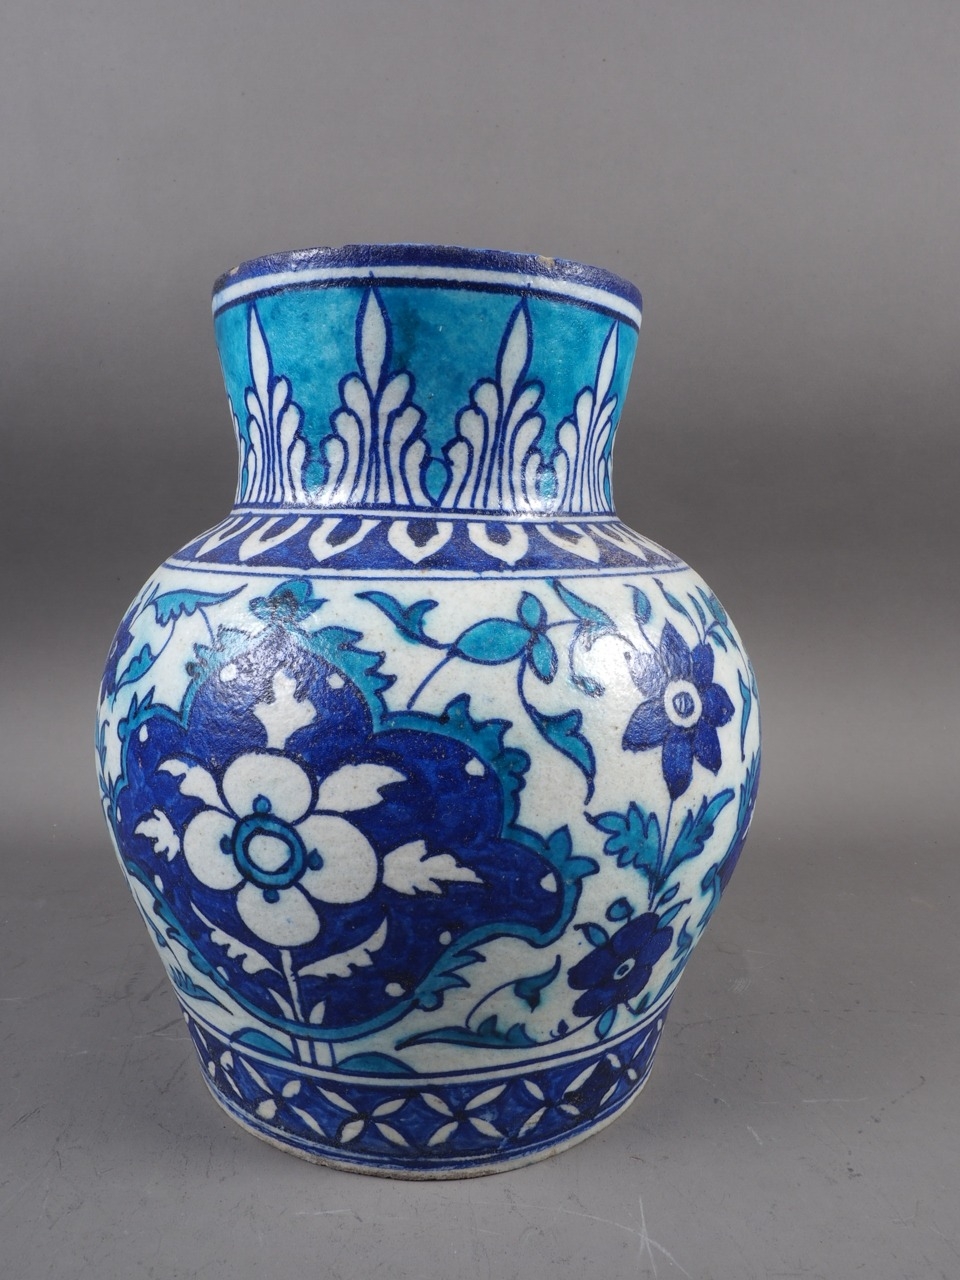 A Persian frit ware vase with all-over floral design in blue and turquoise, 9 1/4" high, and a - Image 6 of 10